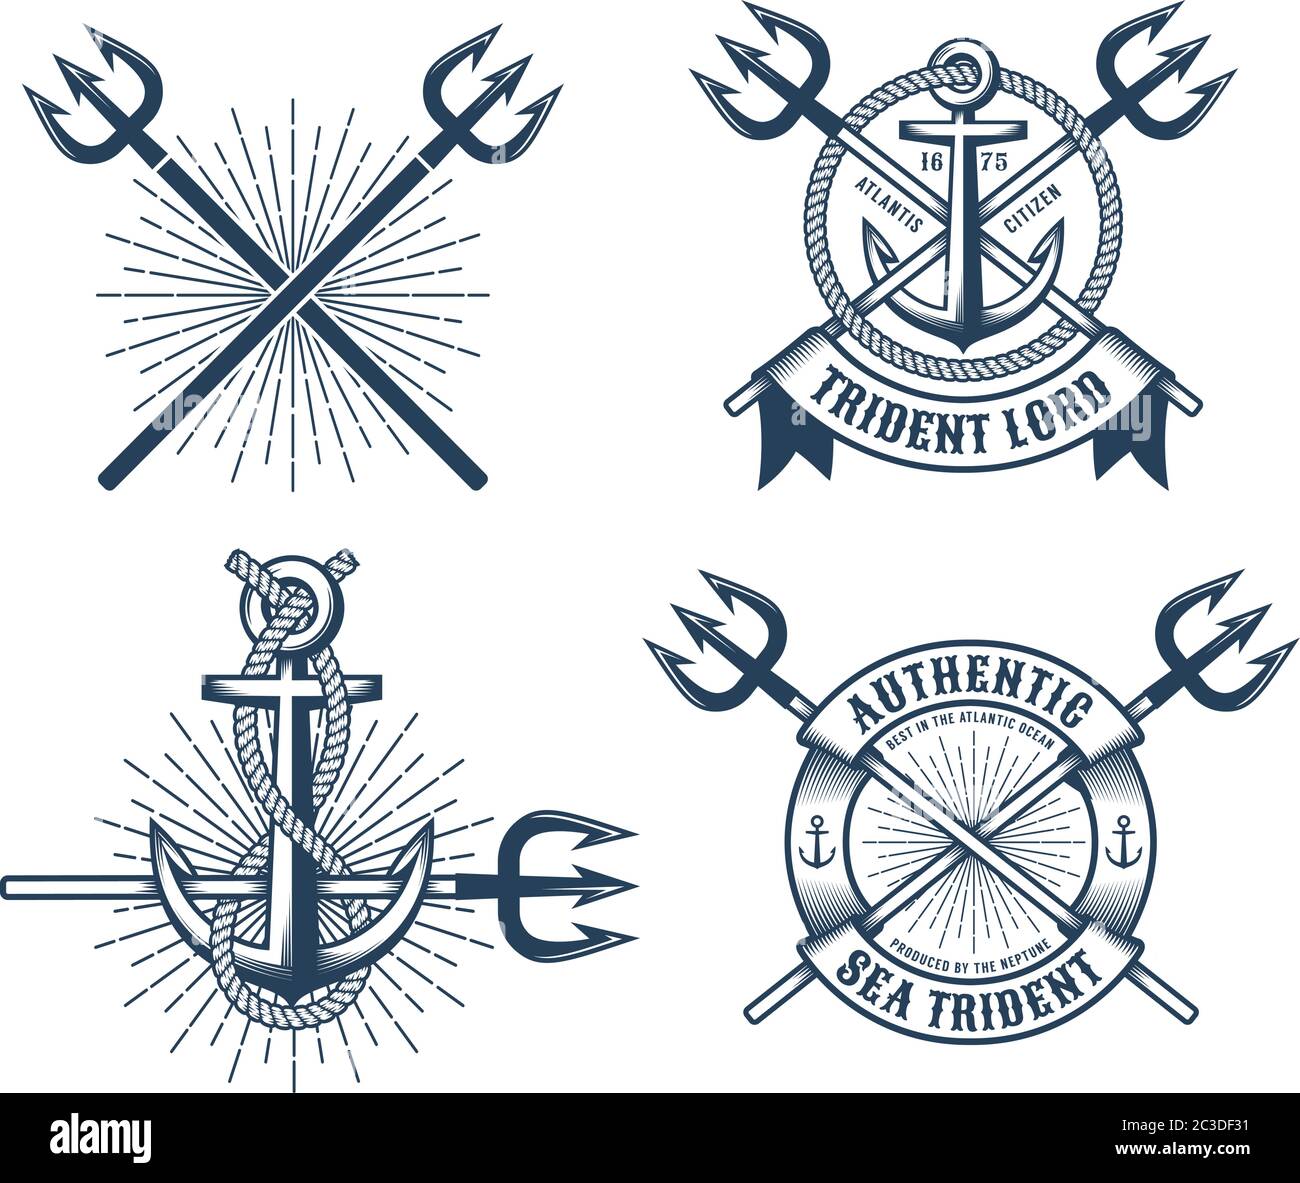 1401 Trident Tattoo Images Stock Photos  Vectors  Shutterstock